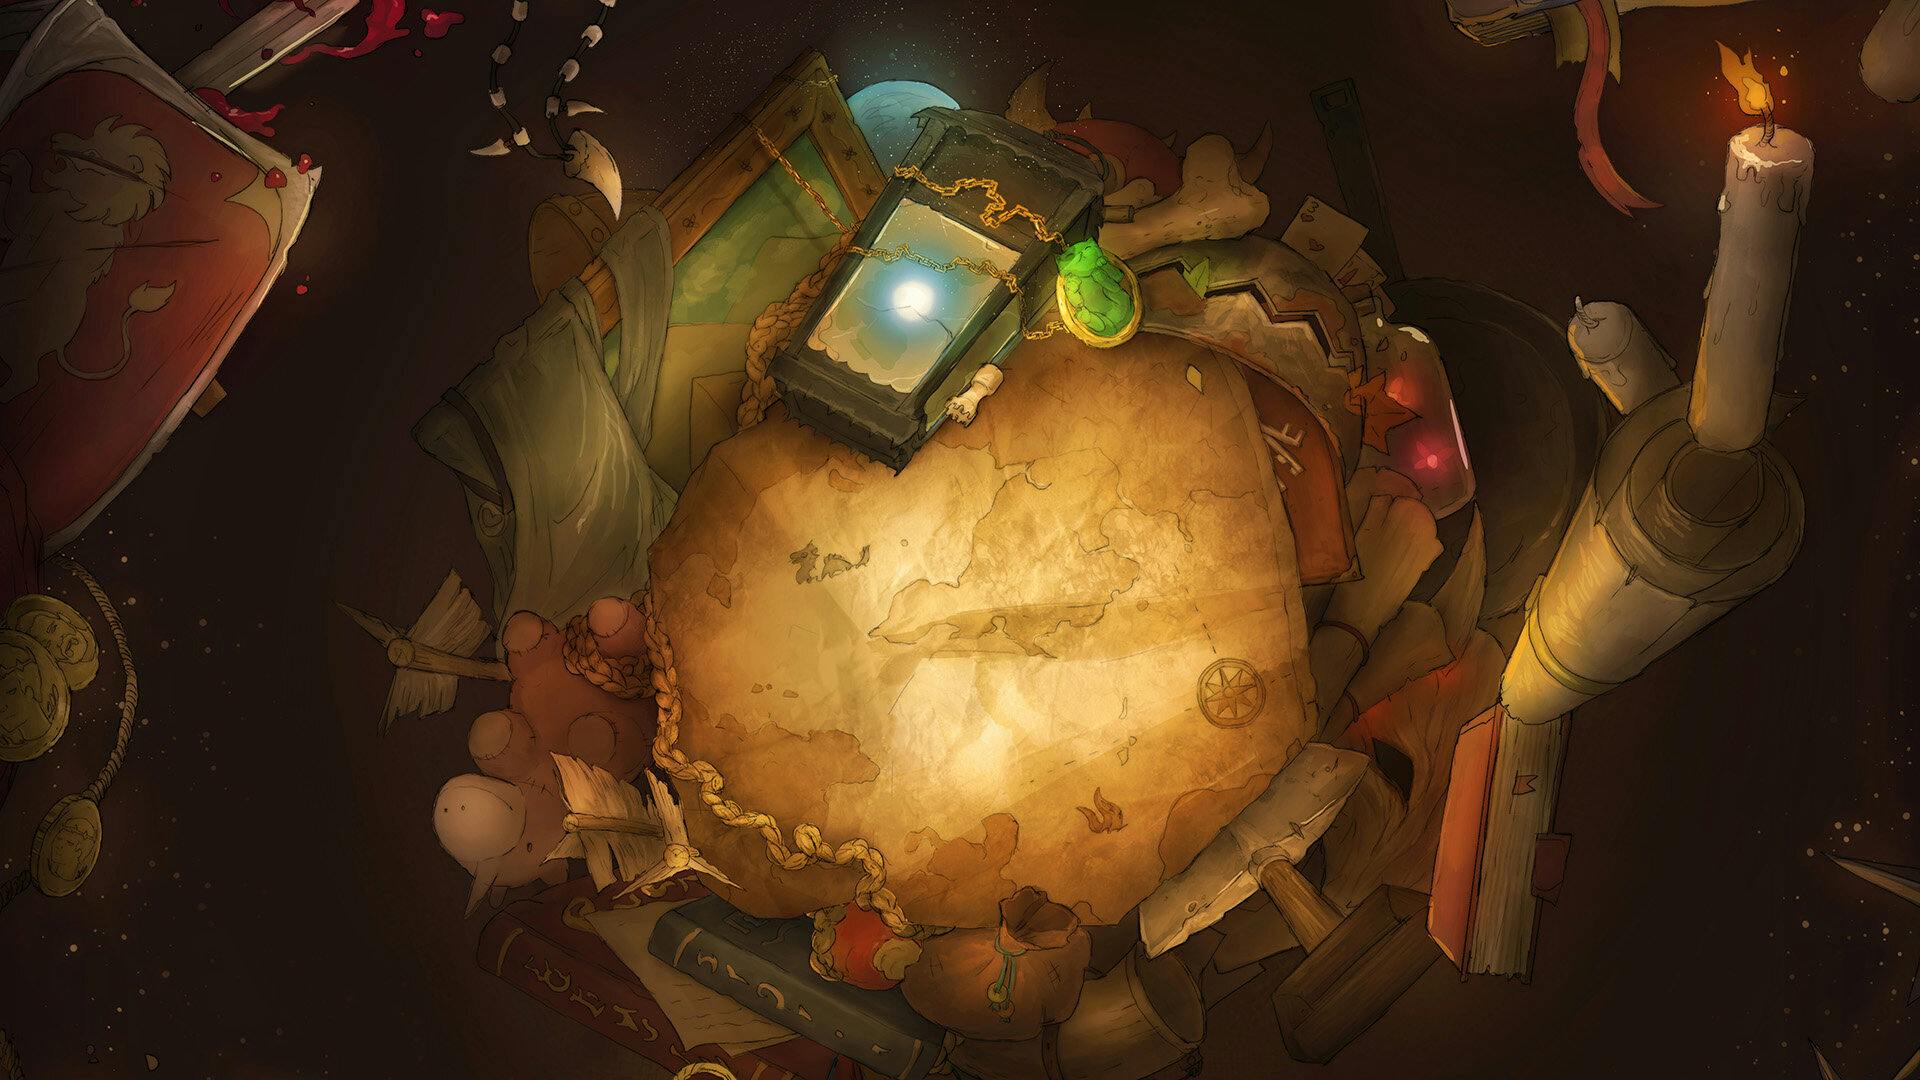 A treasure map surrounded by loot inside a bag of holding